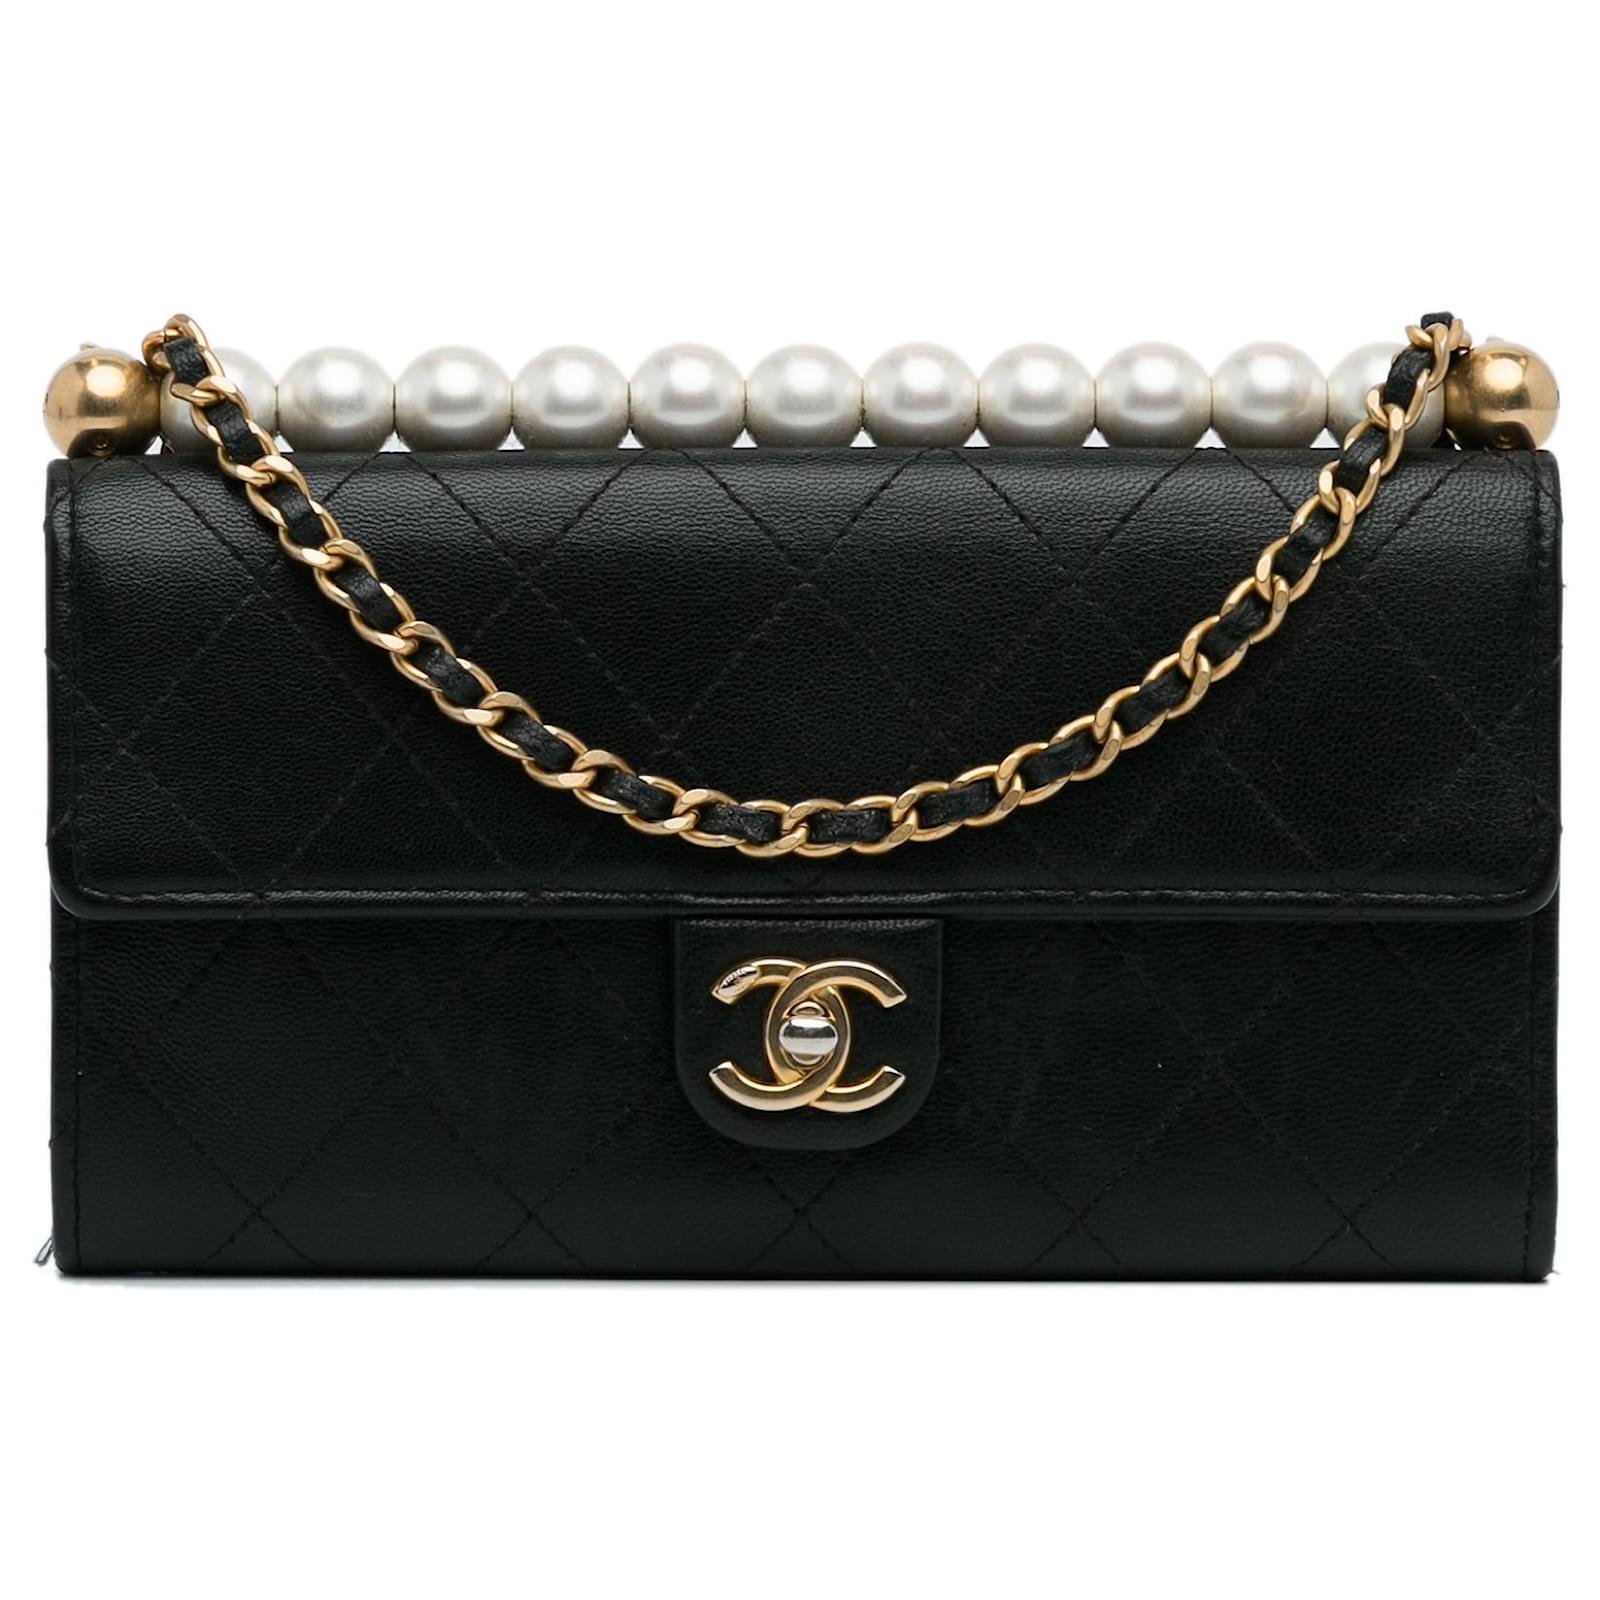 Chanel Black Chic Pearls Clutch with Chain Leather Goatskin ref